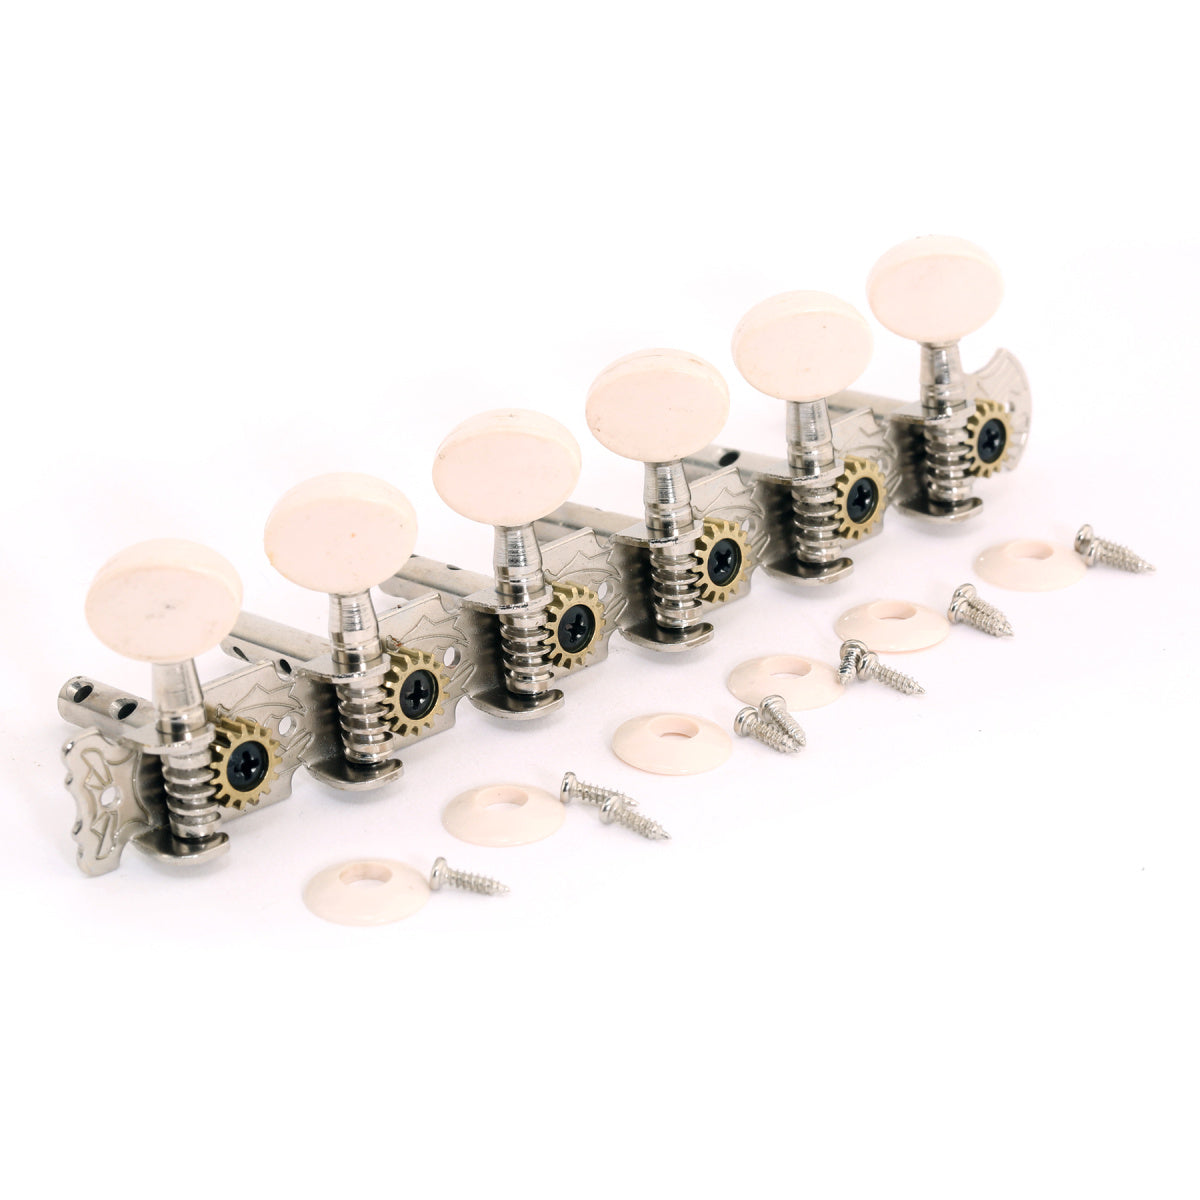 Musiclily 6 on a Plate Guitar Tuners Tuning Pegs Keys Machine Heads for Acoustic or Classical Guitar,Nickel